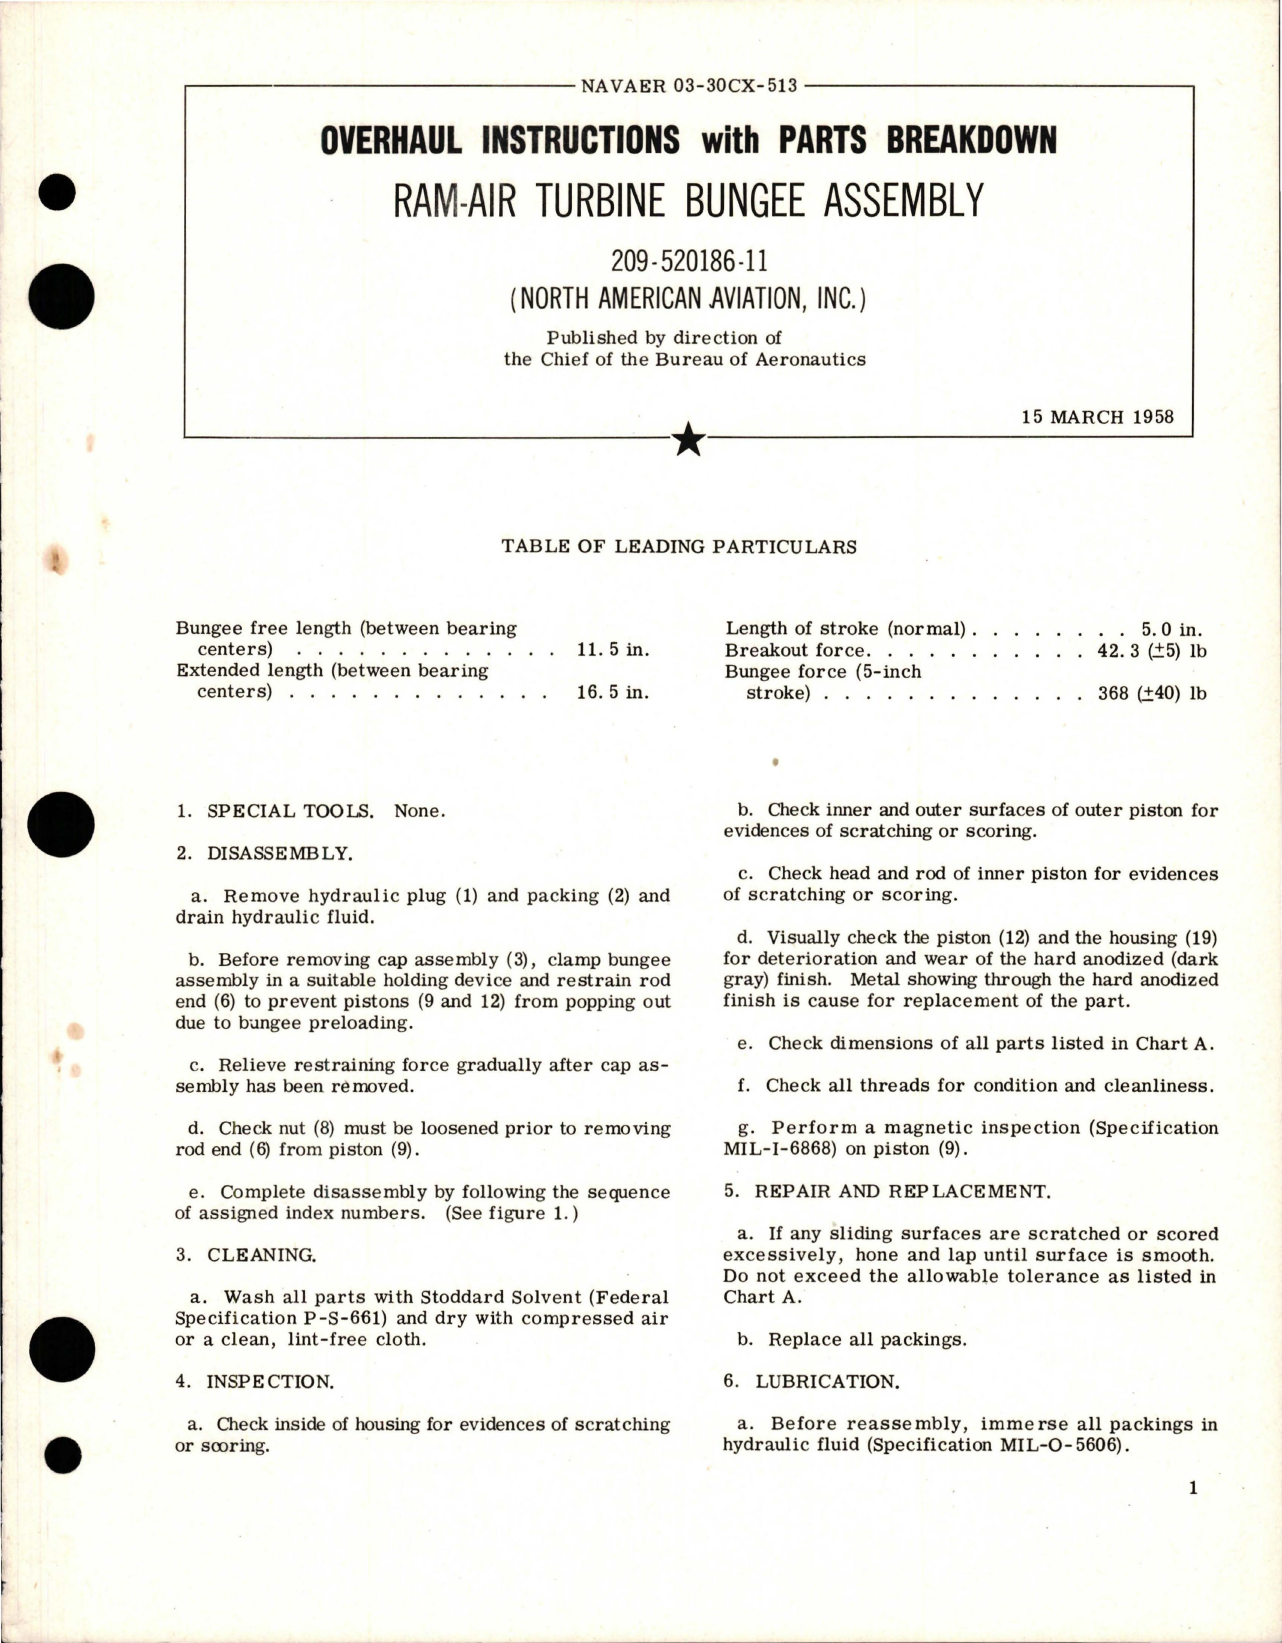 Sample page 1 from AirCorps Library document: Overhaul Instructions with Parts Breakdown for Ram-Air Turbine Bungee Assembly - 209-520186-11